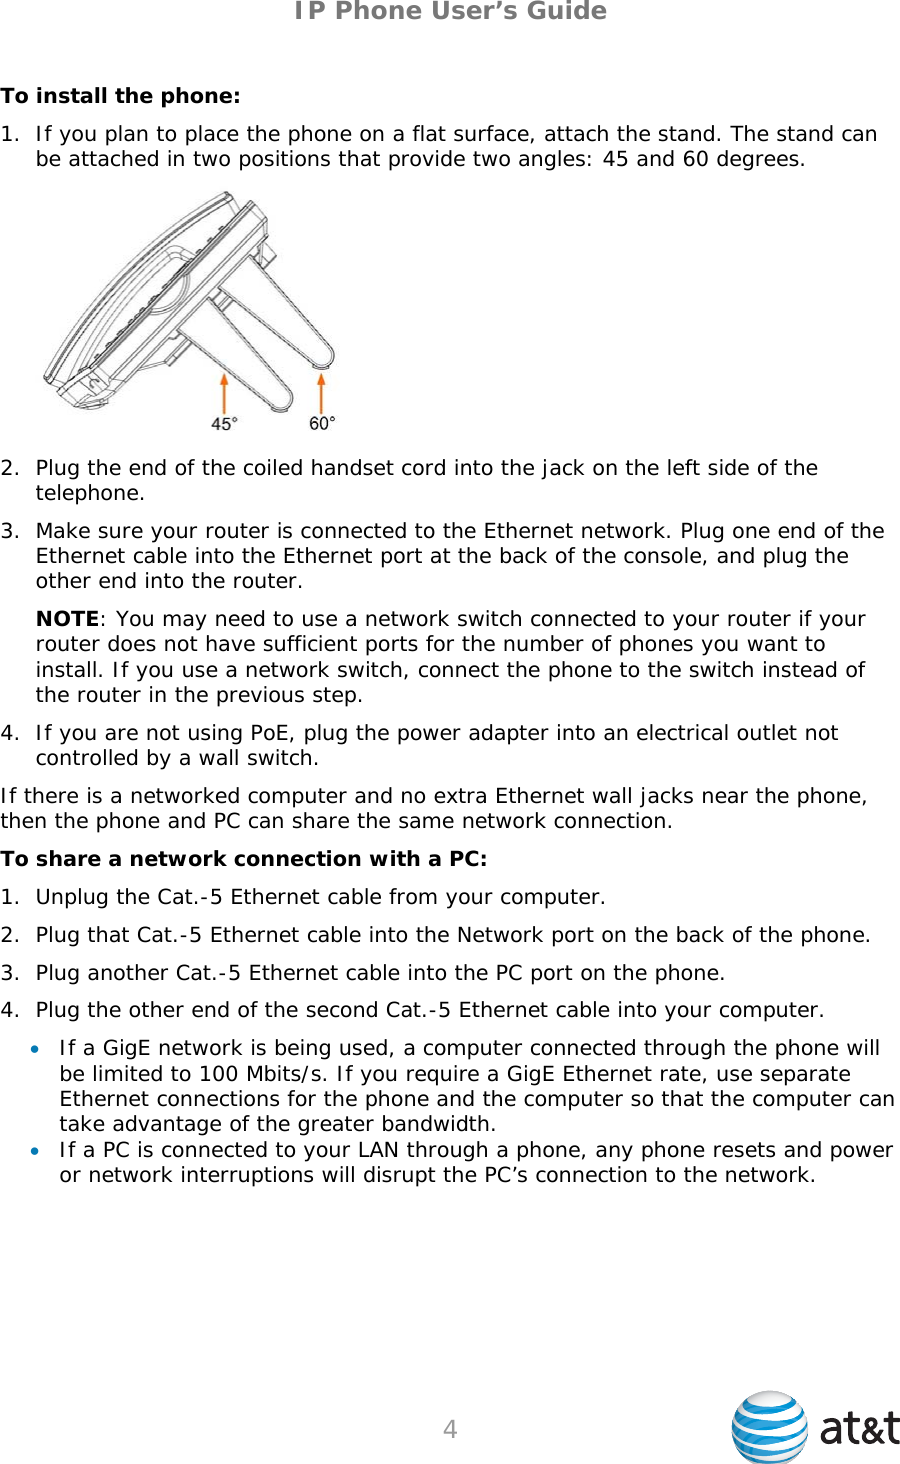 IP Phone User’s Guide To install the phone: 1. If you plan to place the phone on a flat surface, attach the stand. The stand can be attached in two positions that provide two angles: 45 and 60 degrees.  2. Plug the end of the coiled handset cord into the jack on the left side of the telephone. 3. Make sure your router is connected to the Ethernet network. Plug one end of the Ethernet cable into the Ethernet port at the back of the console, and plug the other end into the router. NOTE: You may need to use a network switch connected to your router if your router does not have sufficient ports for the number of phones you want to install. If you use a network switch, connect the phone to the switch instead of the router in the previous step. 4. If you are not using PoE, plug the power adapter into an electrical outlet not controlled by a wall switch. If there is a networked computer and no extra Ethernet wall jacks near the phone, then the phone and PC can share the same network connection. To share a network connection with a PC: 1. Unplug the Cat.-5 Ethernet cable from your computer. 2. Plug that Cat.-5 Ethernet cable into the Network port on the back of the phone. 3. Plug another Cat.-5 Ethernet cable into the PC port on the phone. 4. Plug the other end of the second Cat.-5 Ethernet cable into your computer.  If a GigE network is being used, a computer connected through the phone will be limited to 100 Mbits/s. If you require a GigE Ethernet rate, use separate Ethernet connections for the phone and the computer so that the computer can take advantage of the greater bandwidth.  If a PC is connected to your LAN through a phone, any phone resets and power or network interruptions will disrupt the PC’s connection to the network.  4   